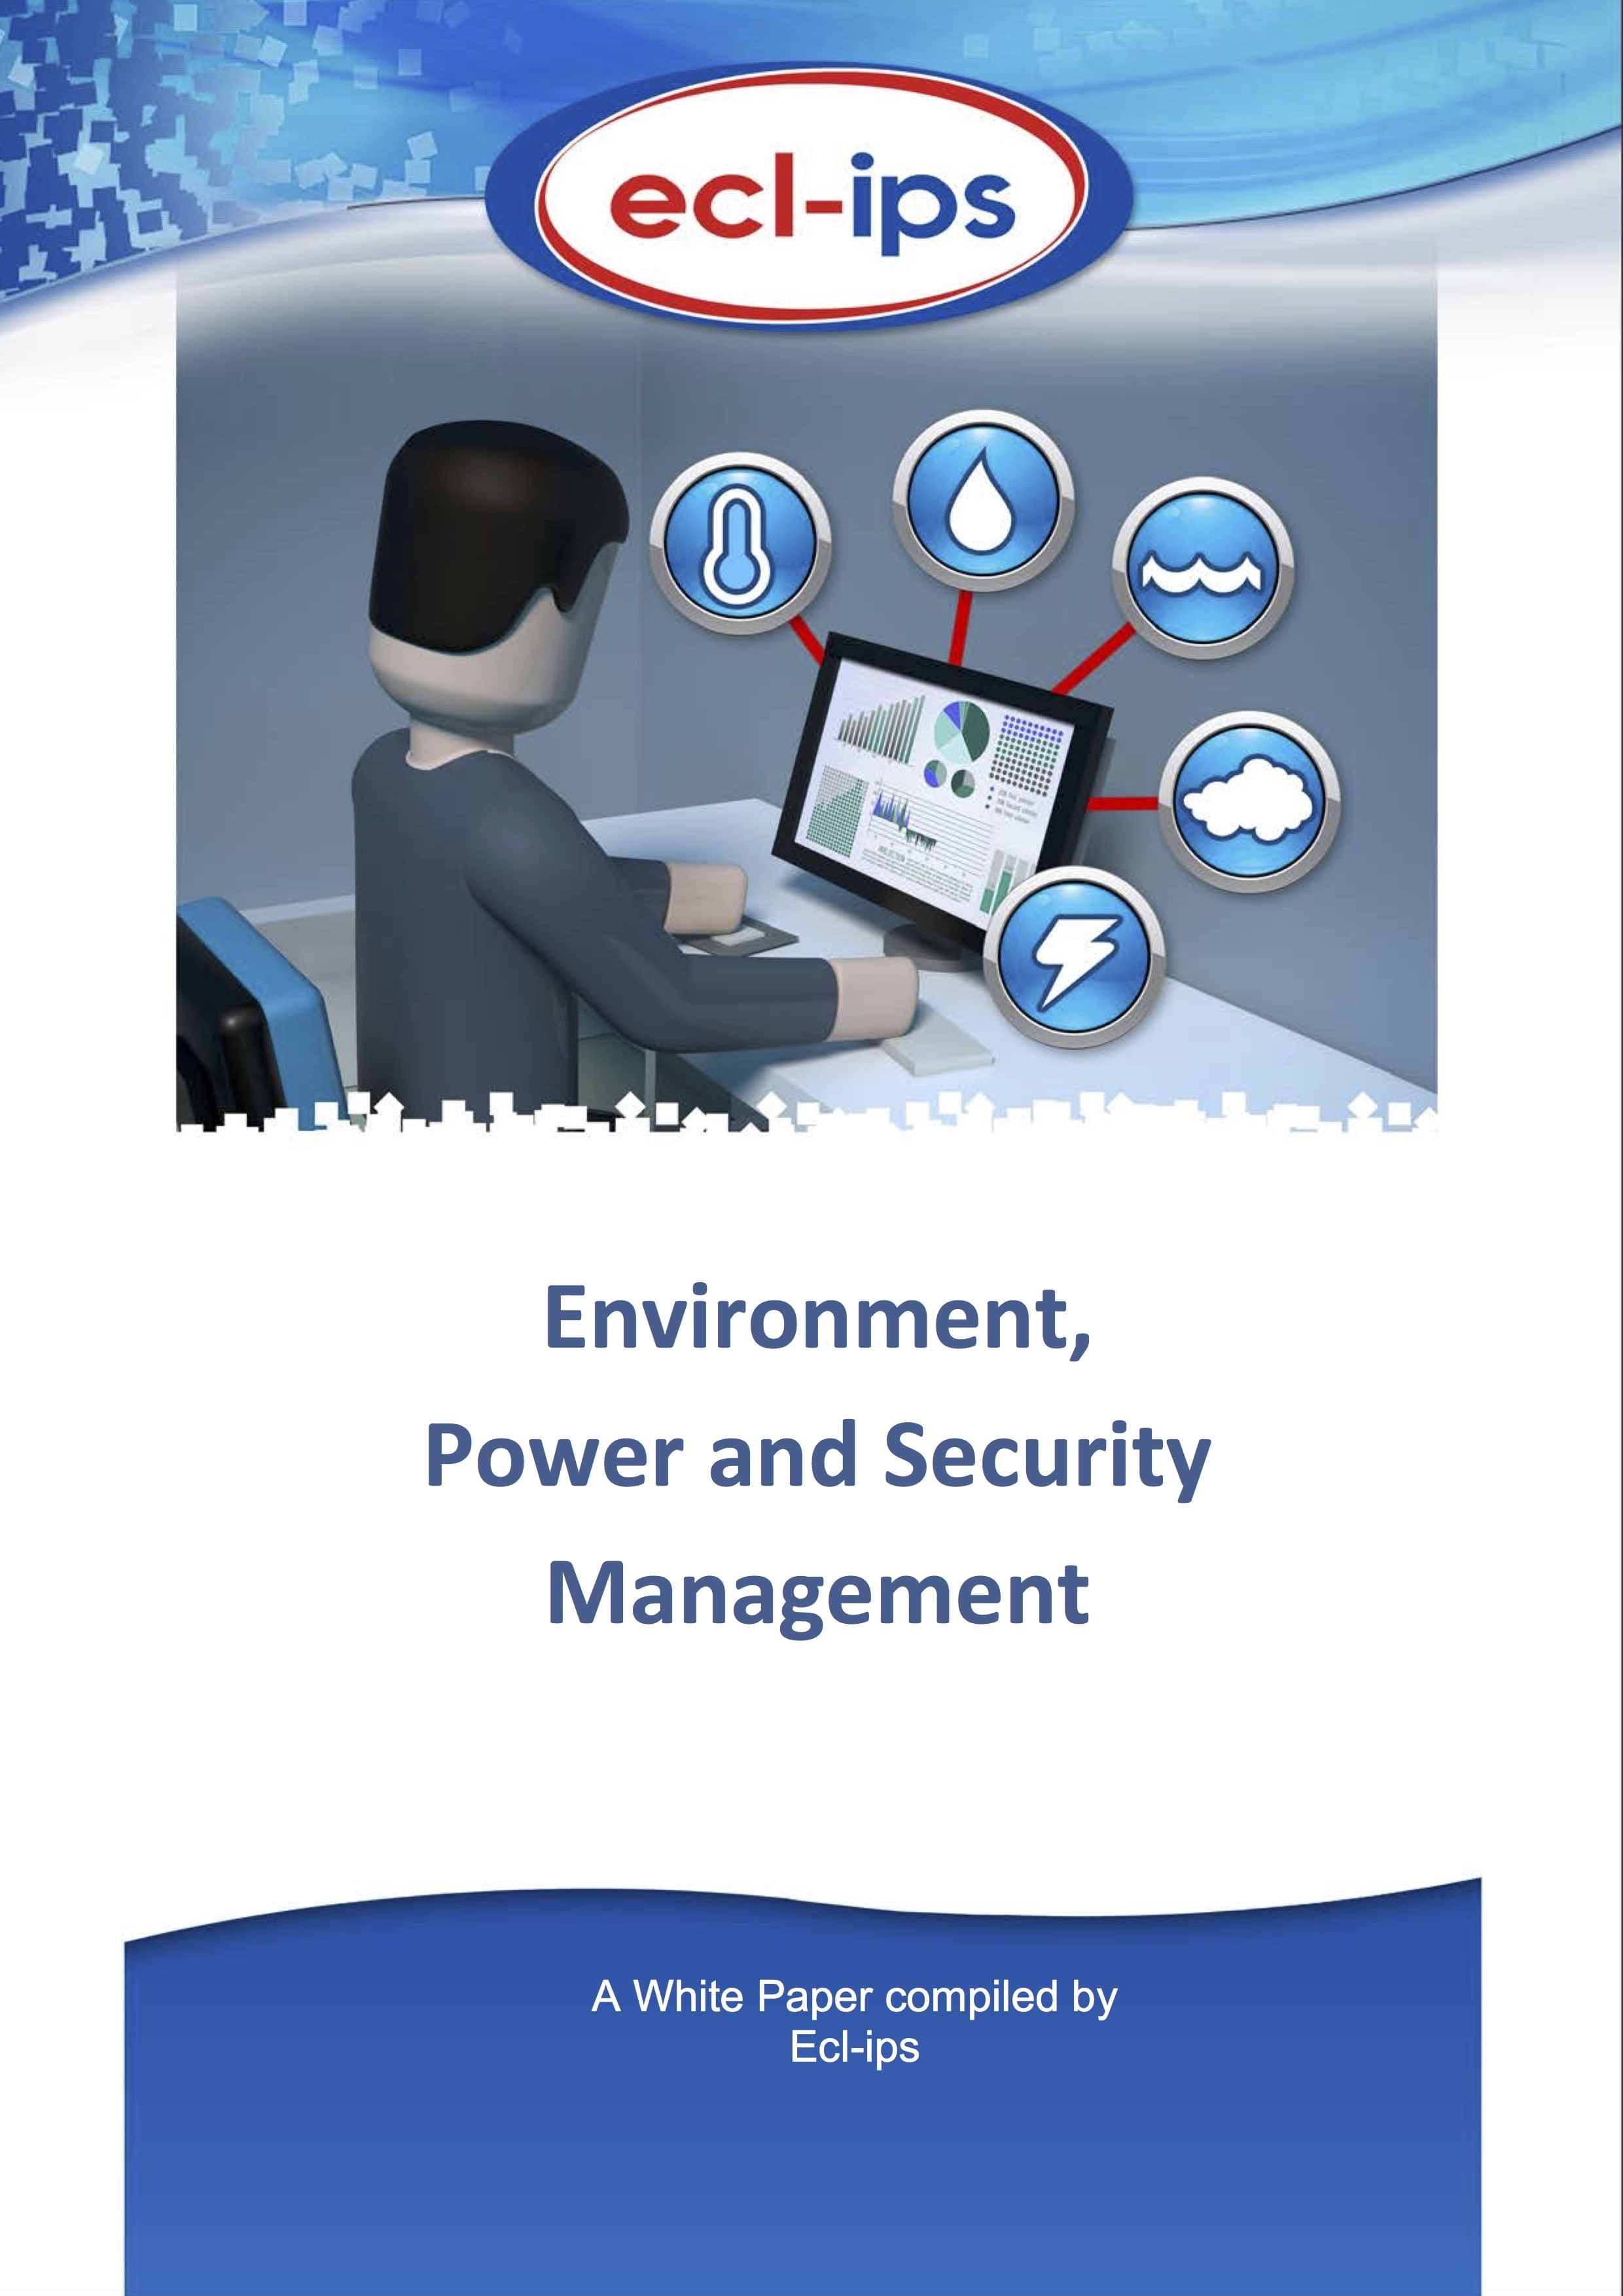 EPSM whitepaper front cover